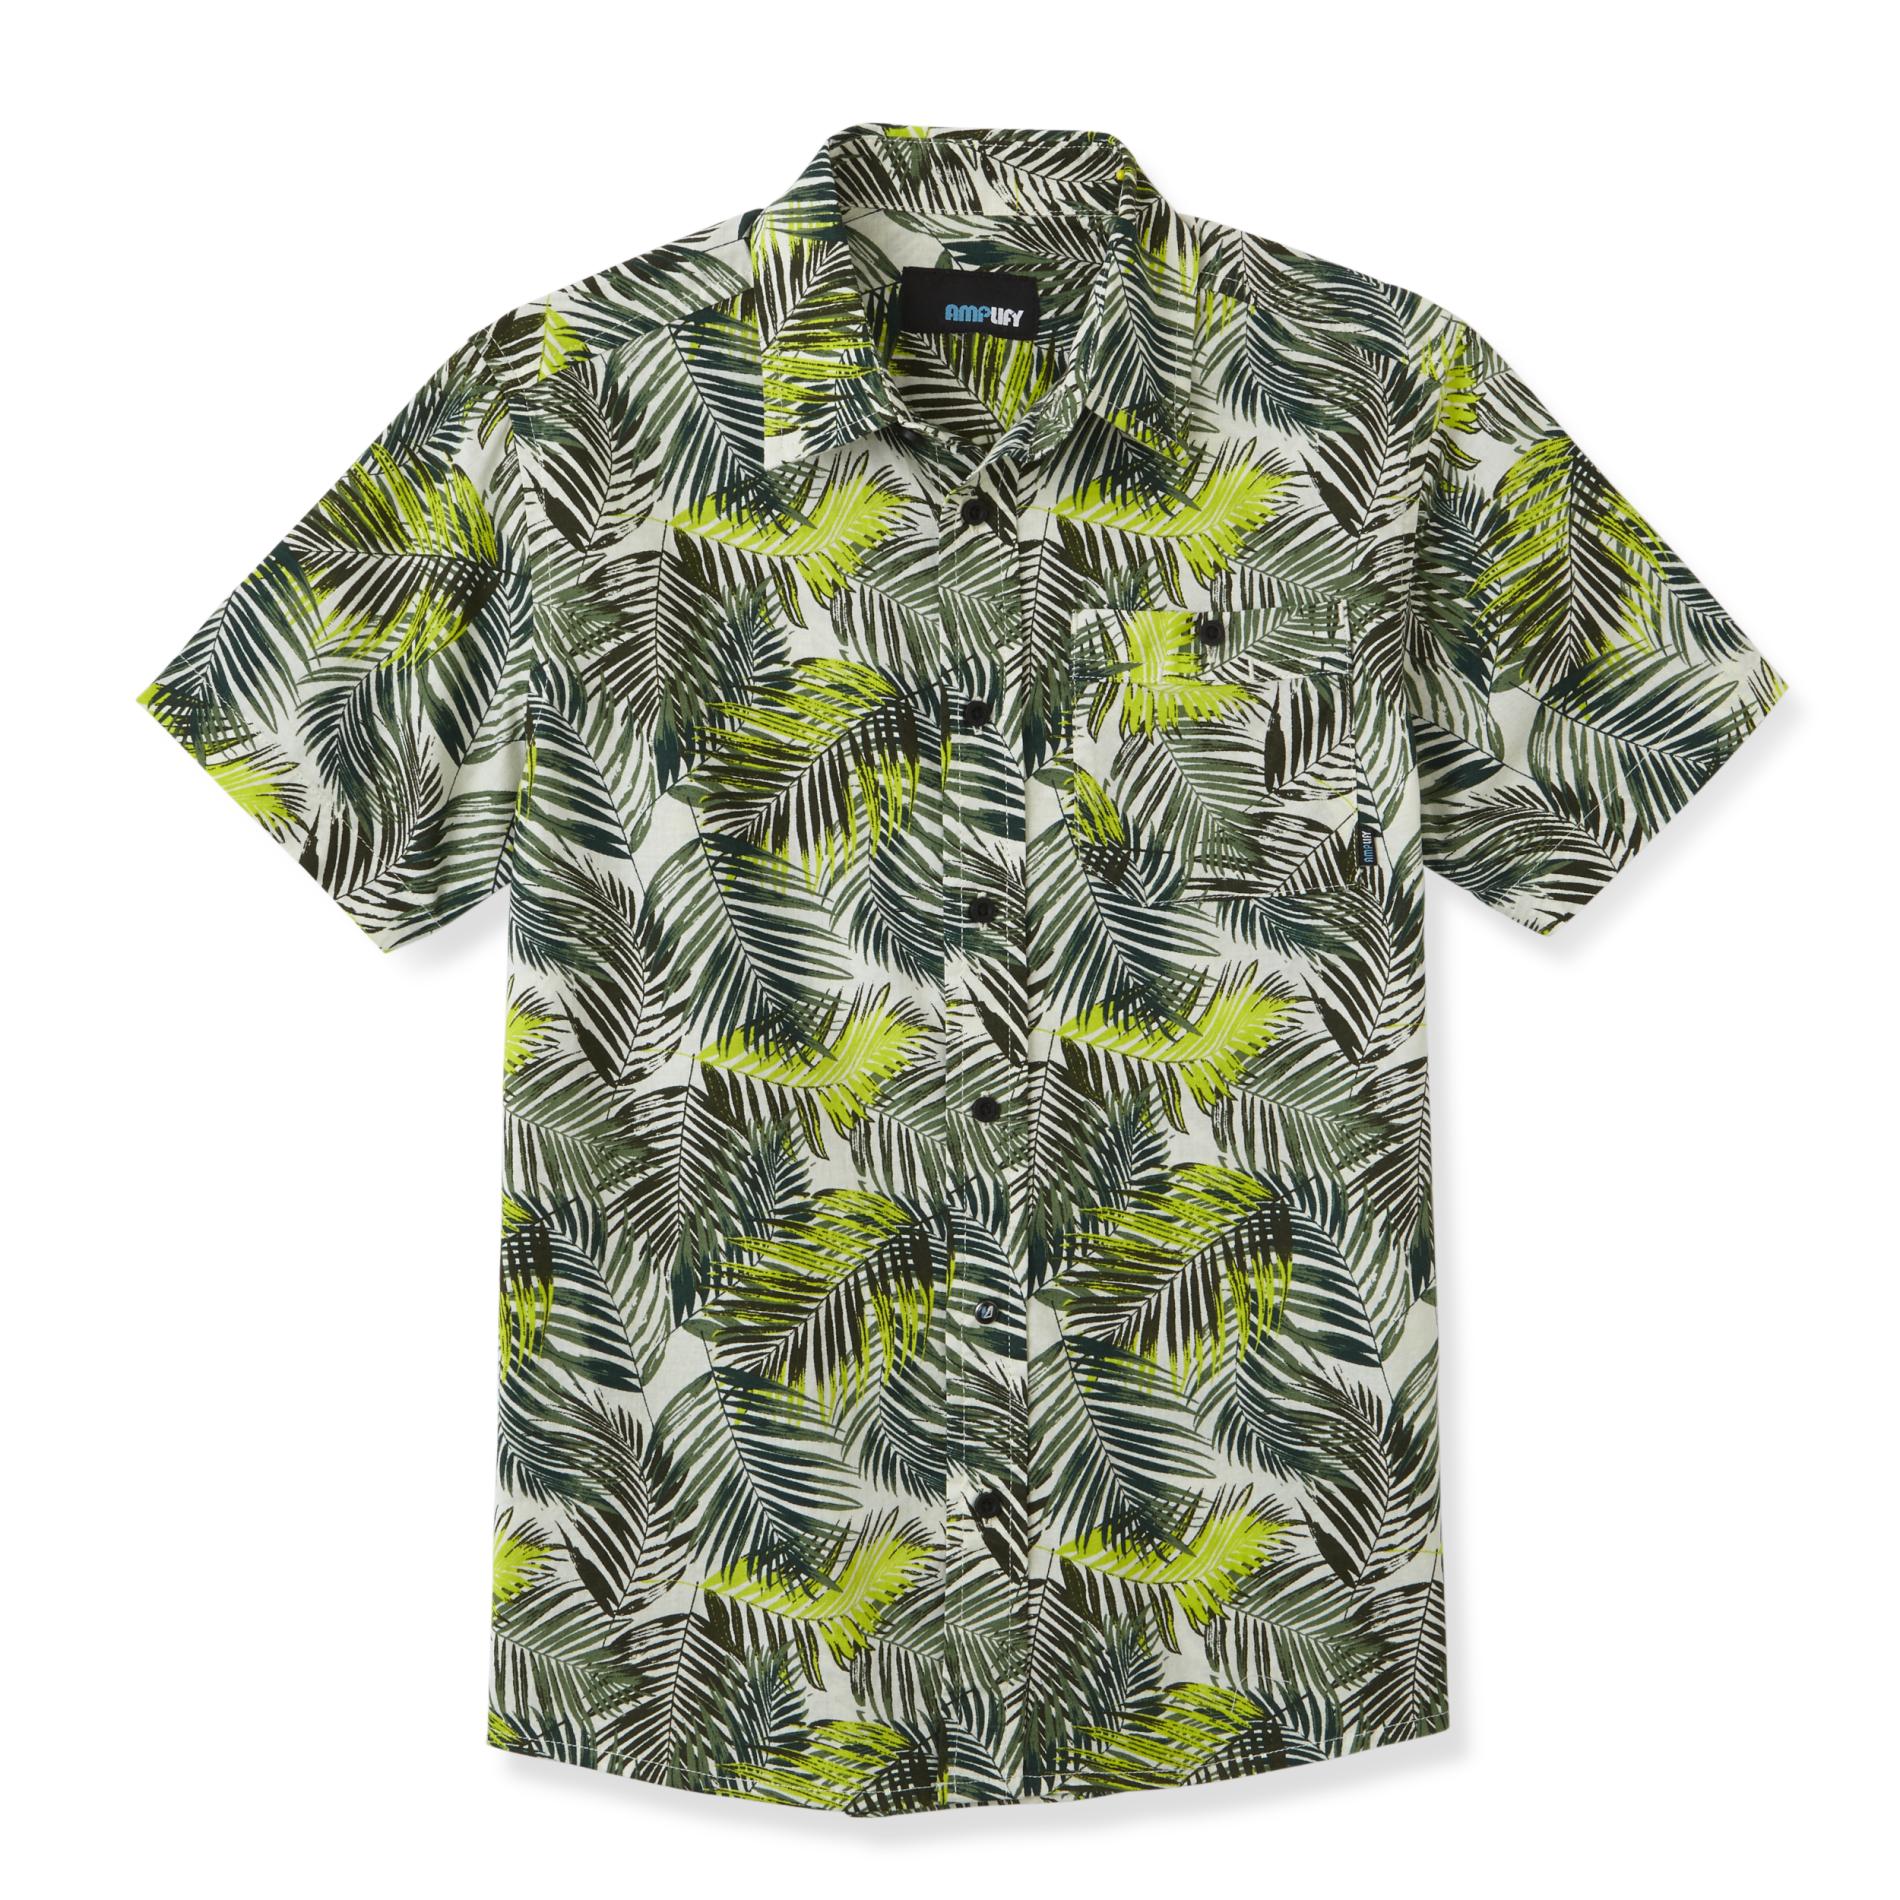 Amplify Boys' Short-Sleeve Button-Front Shirt - Palm Leaves